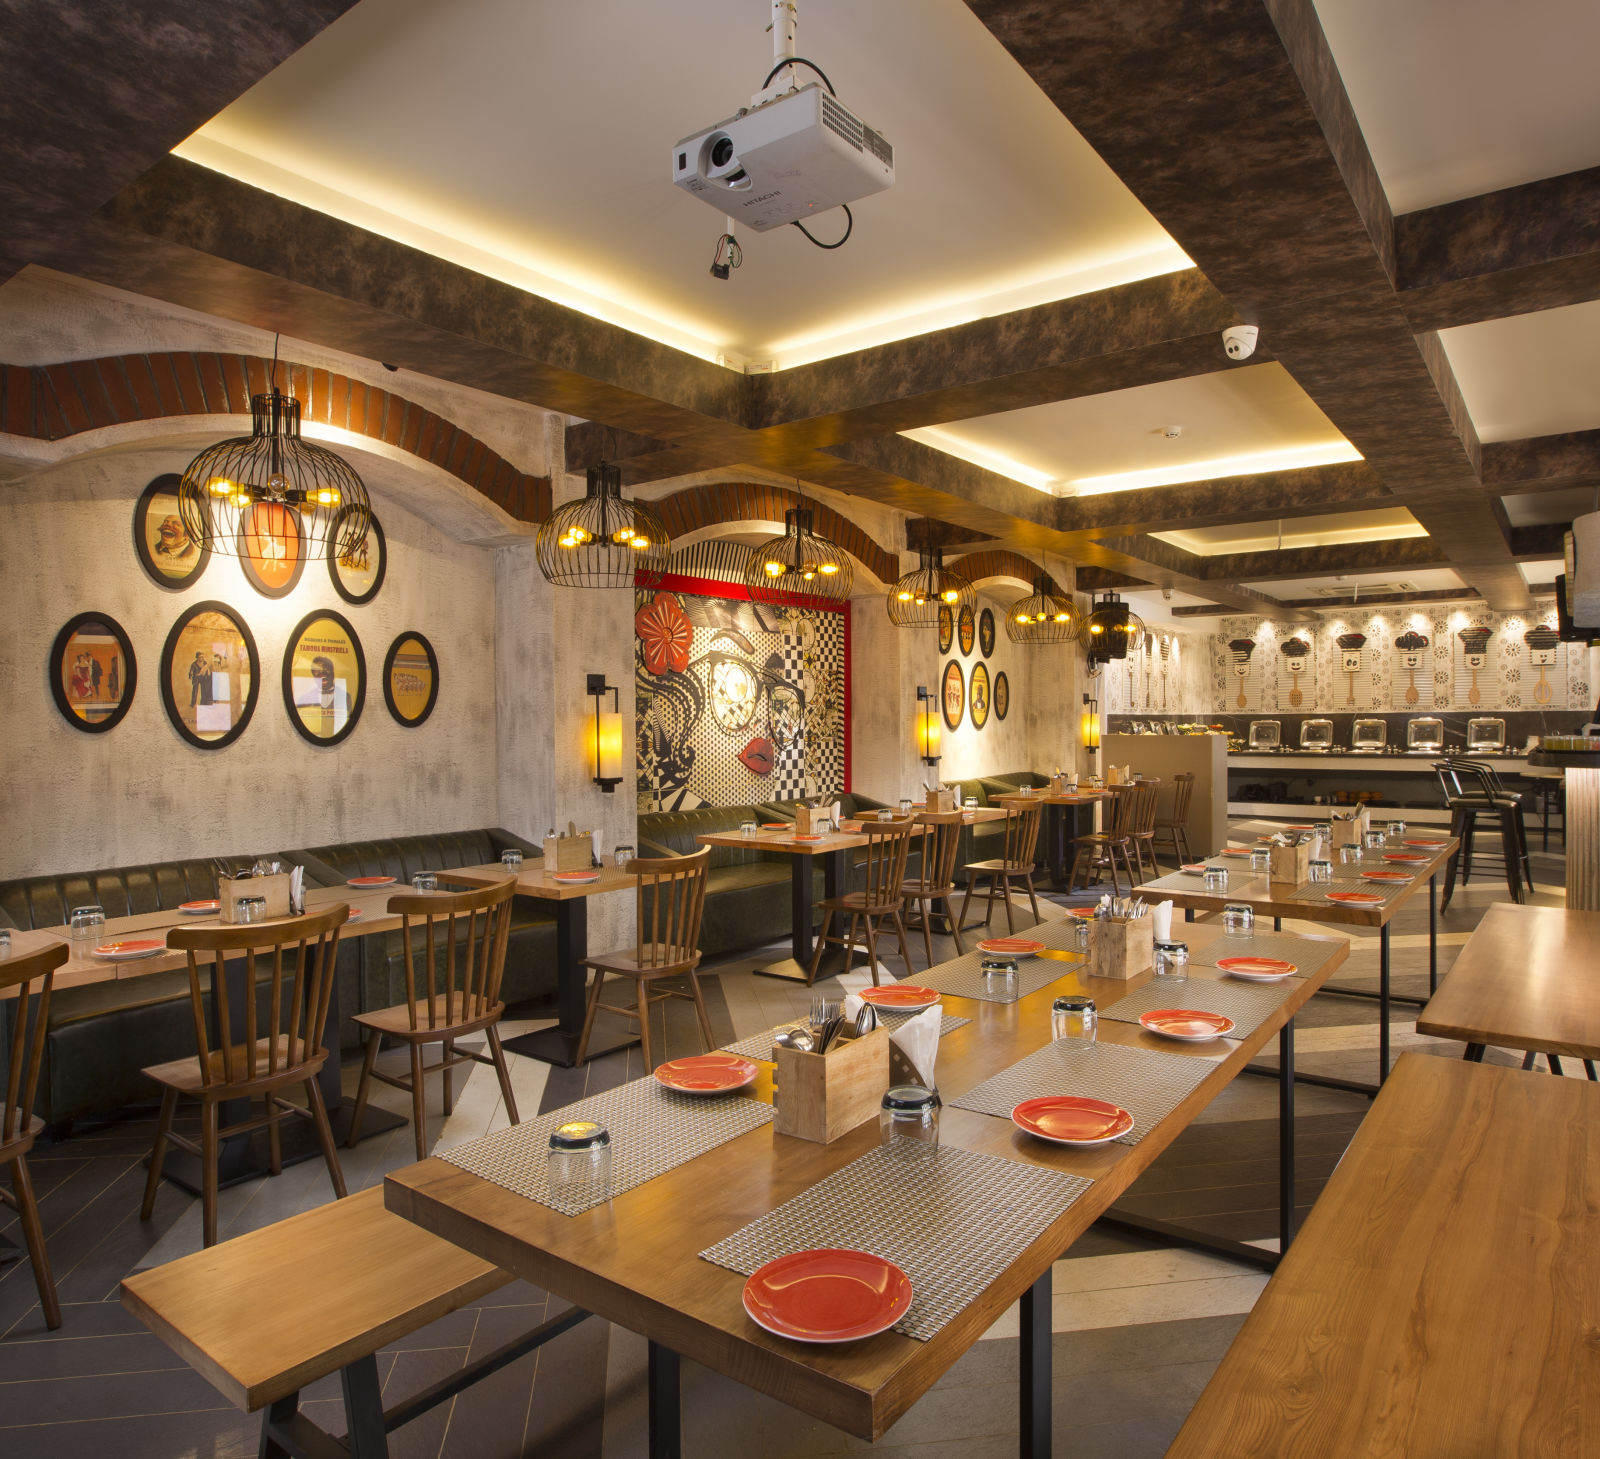 A cosy restaurant interior with wooden tables, pendant lighting and a buffet area in the background - Hotel Southend by TGI - Bommasandra, Bangalore